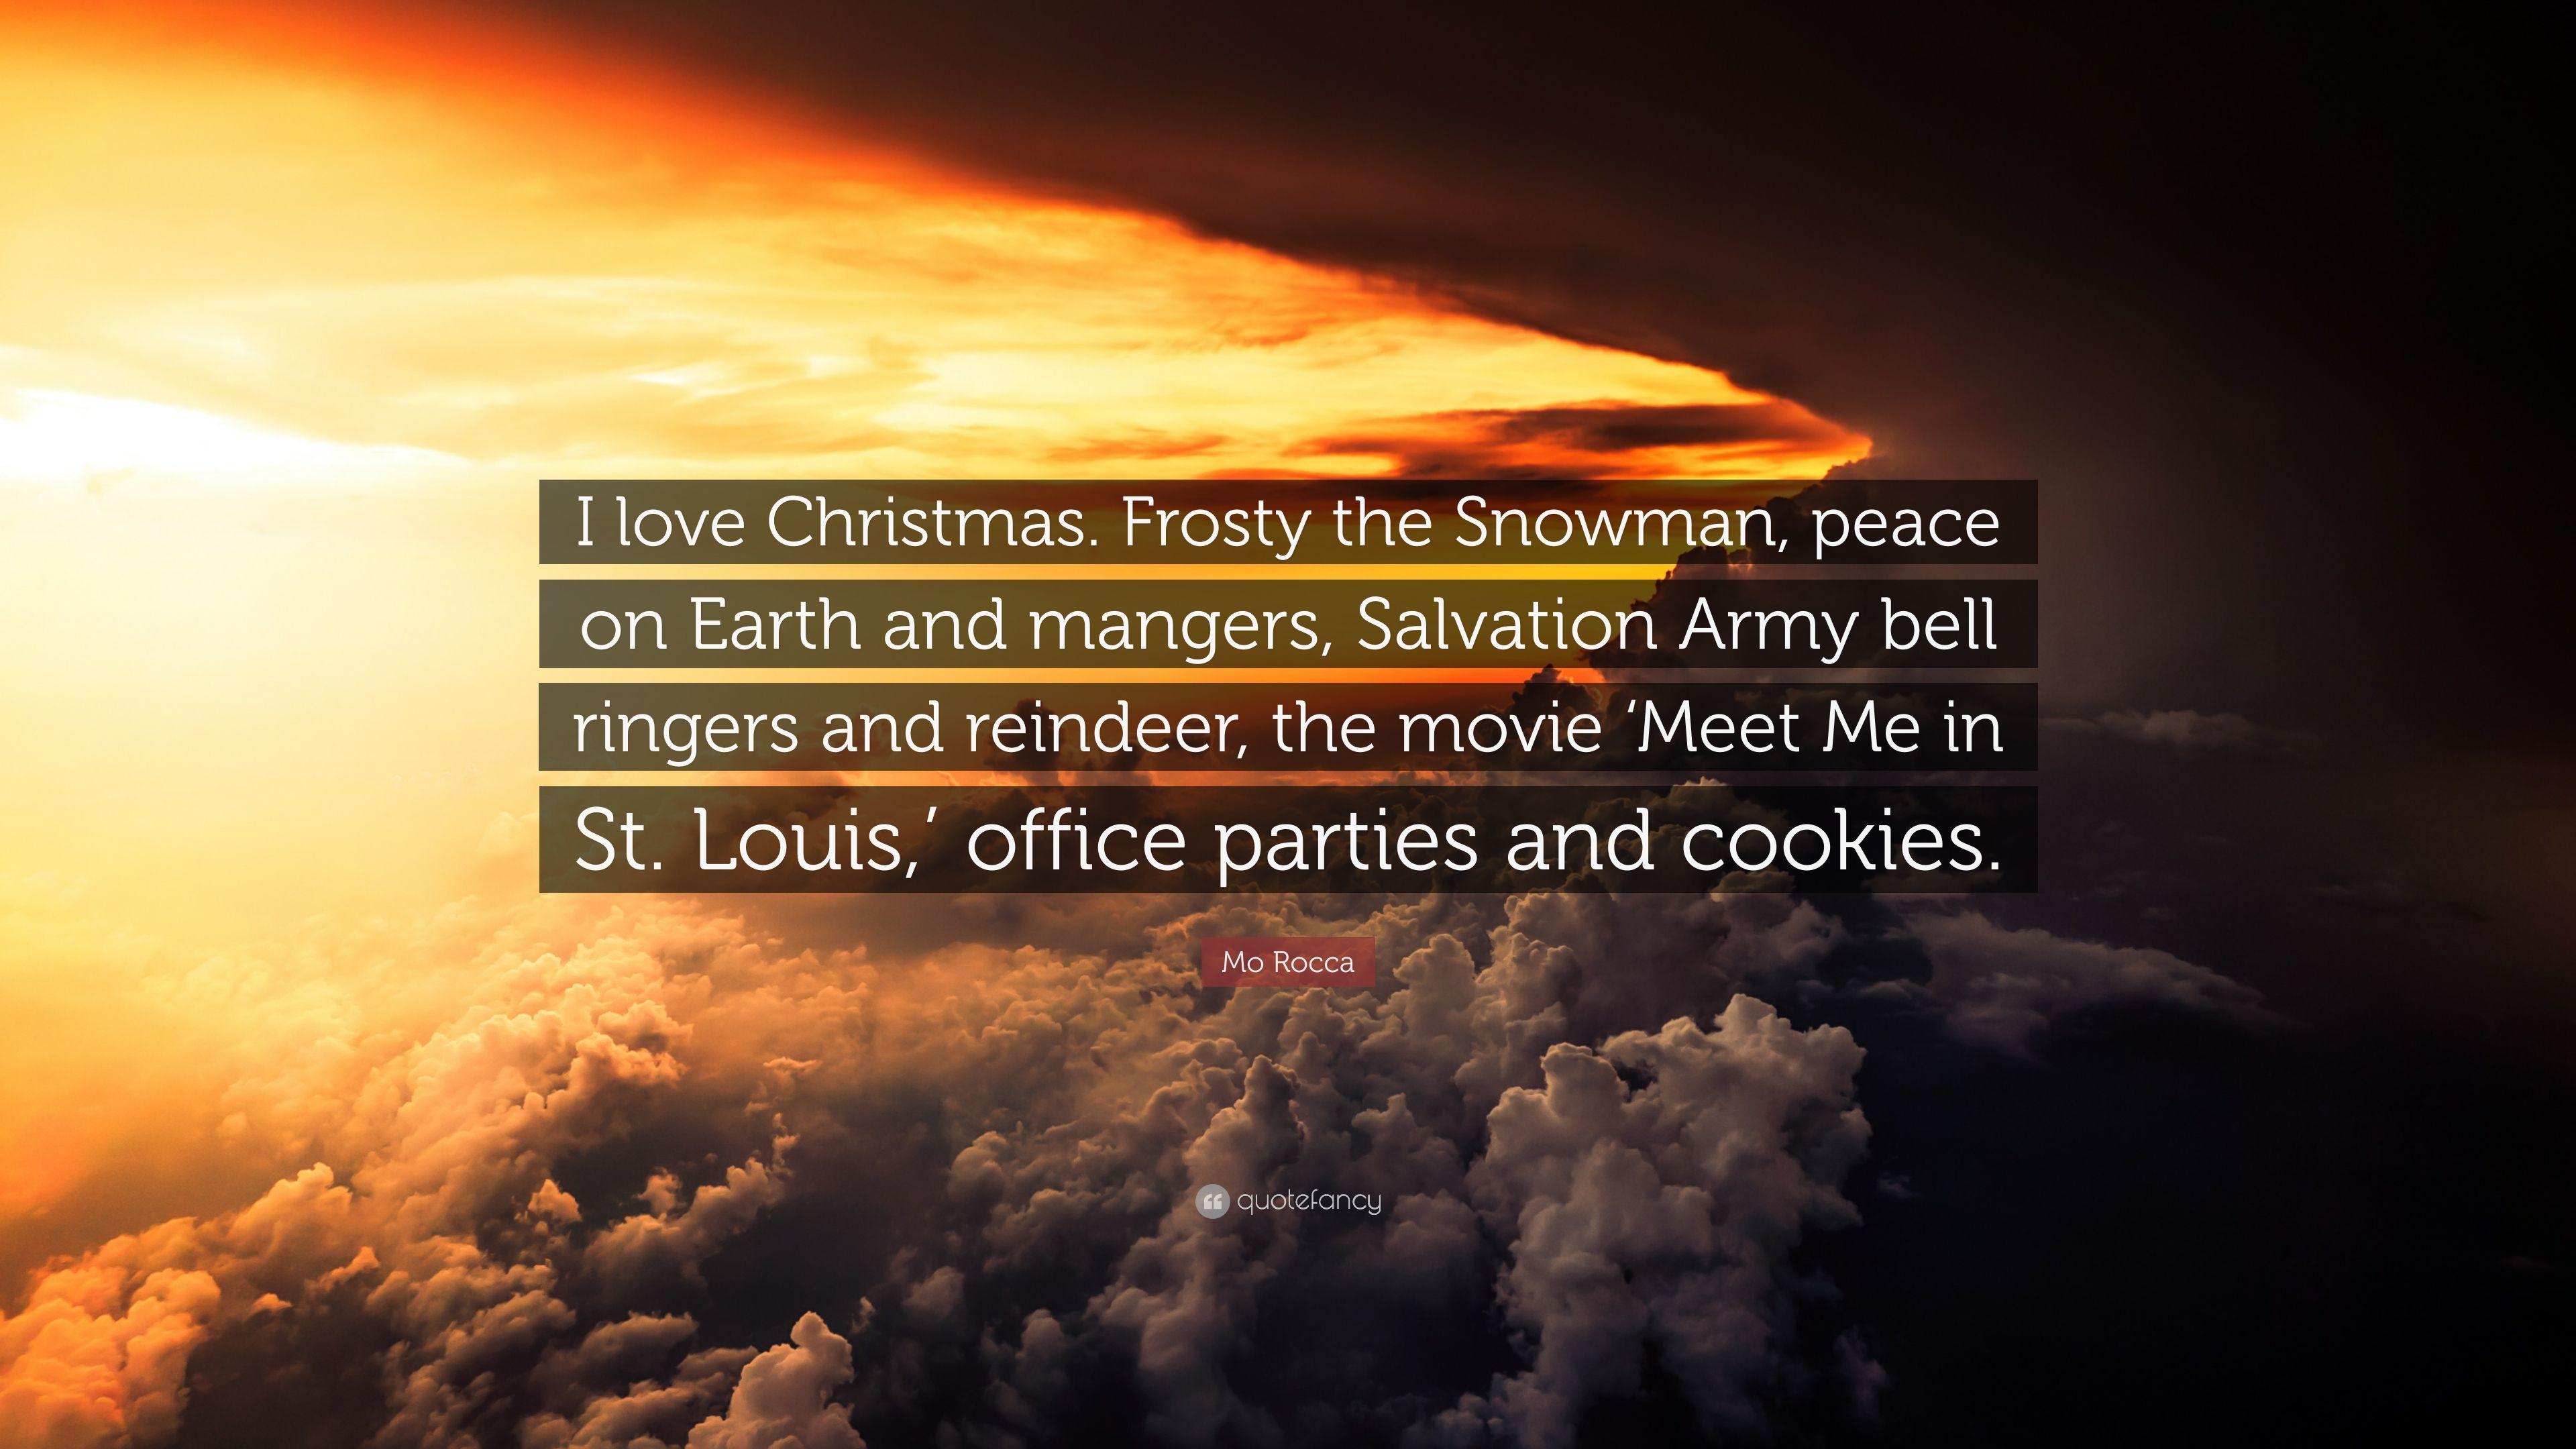 Mo Rocca Quote: “I love Christmas. Frosty the Snowman, peace